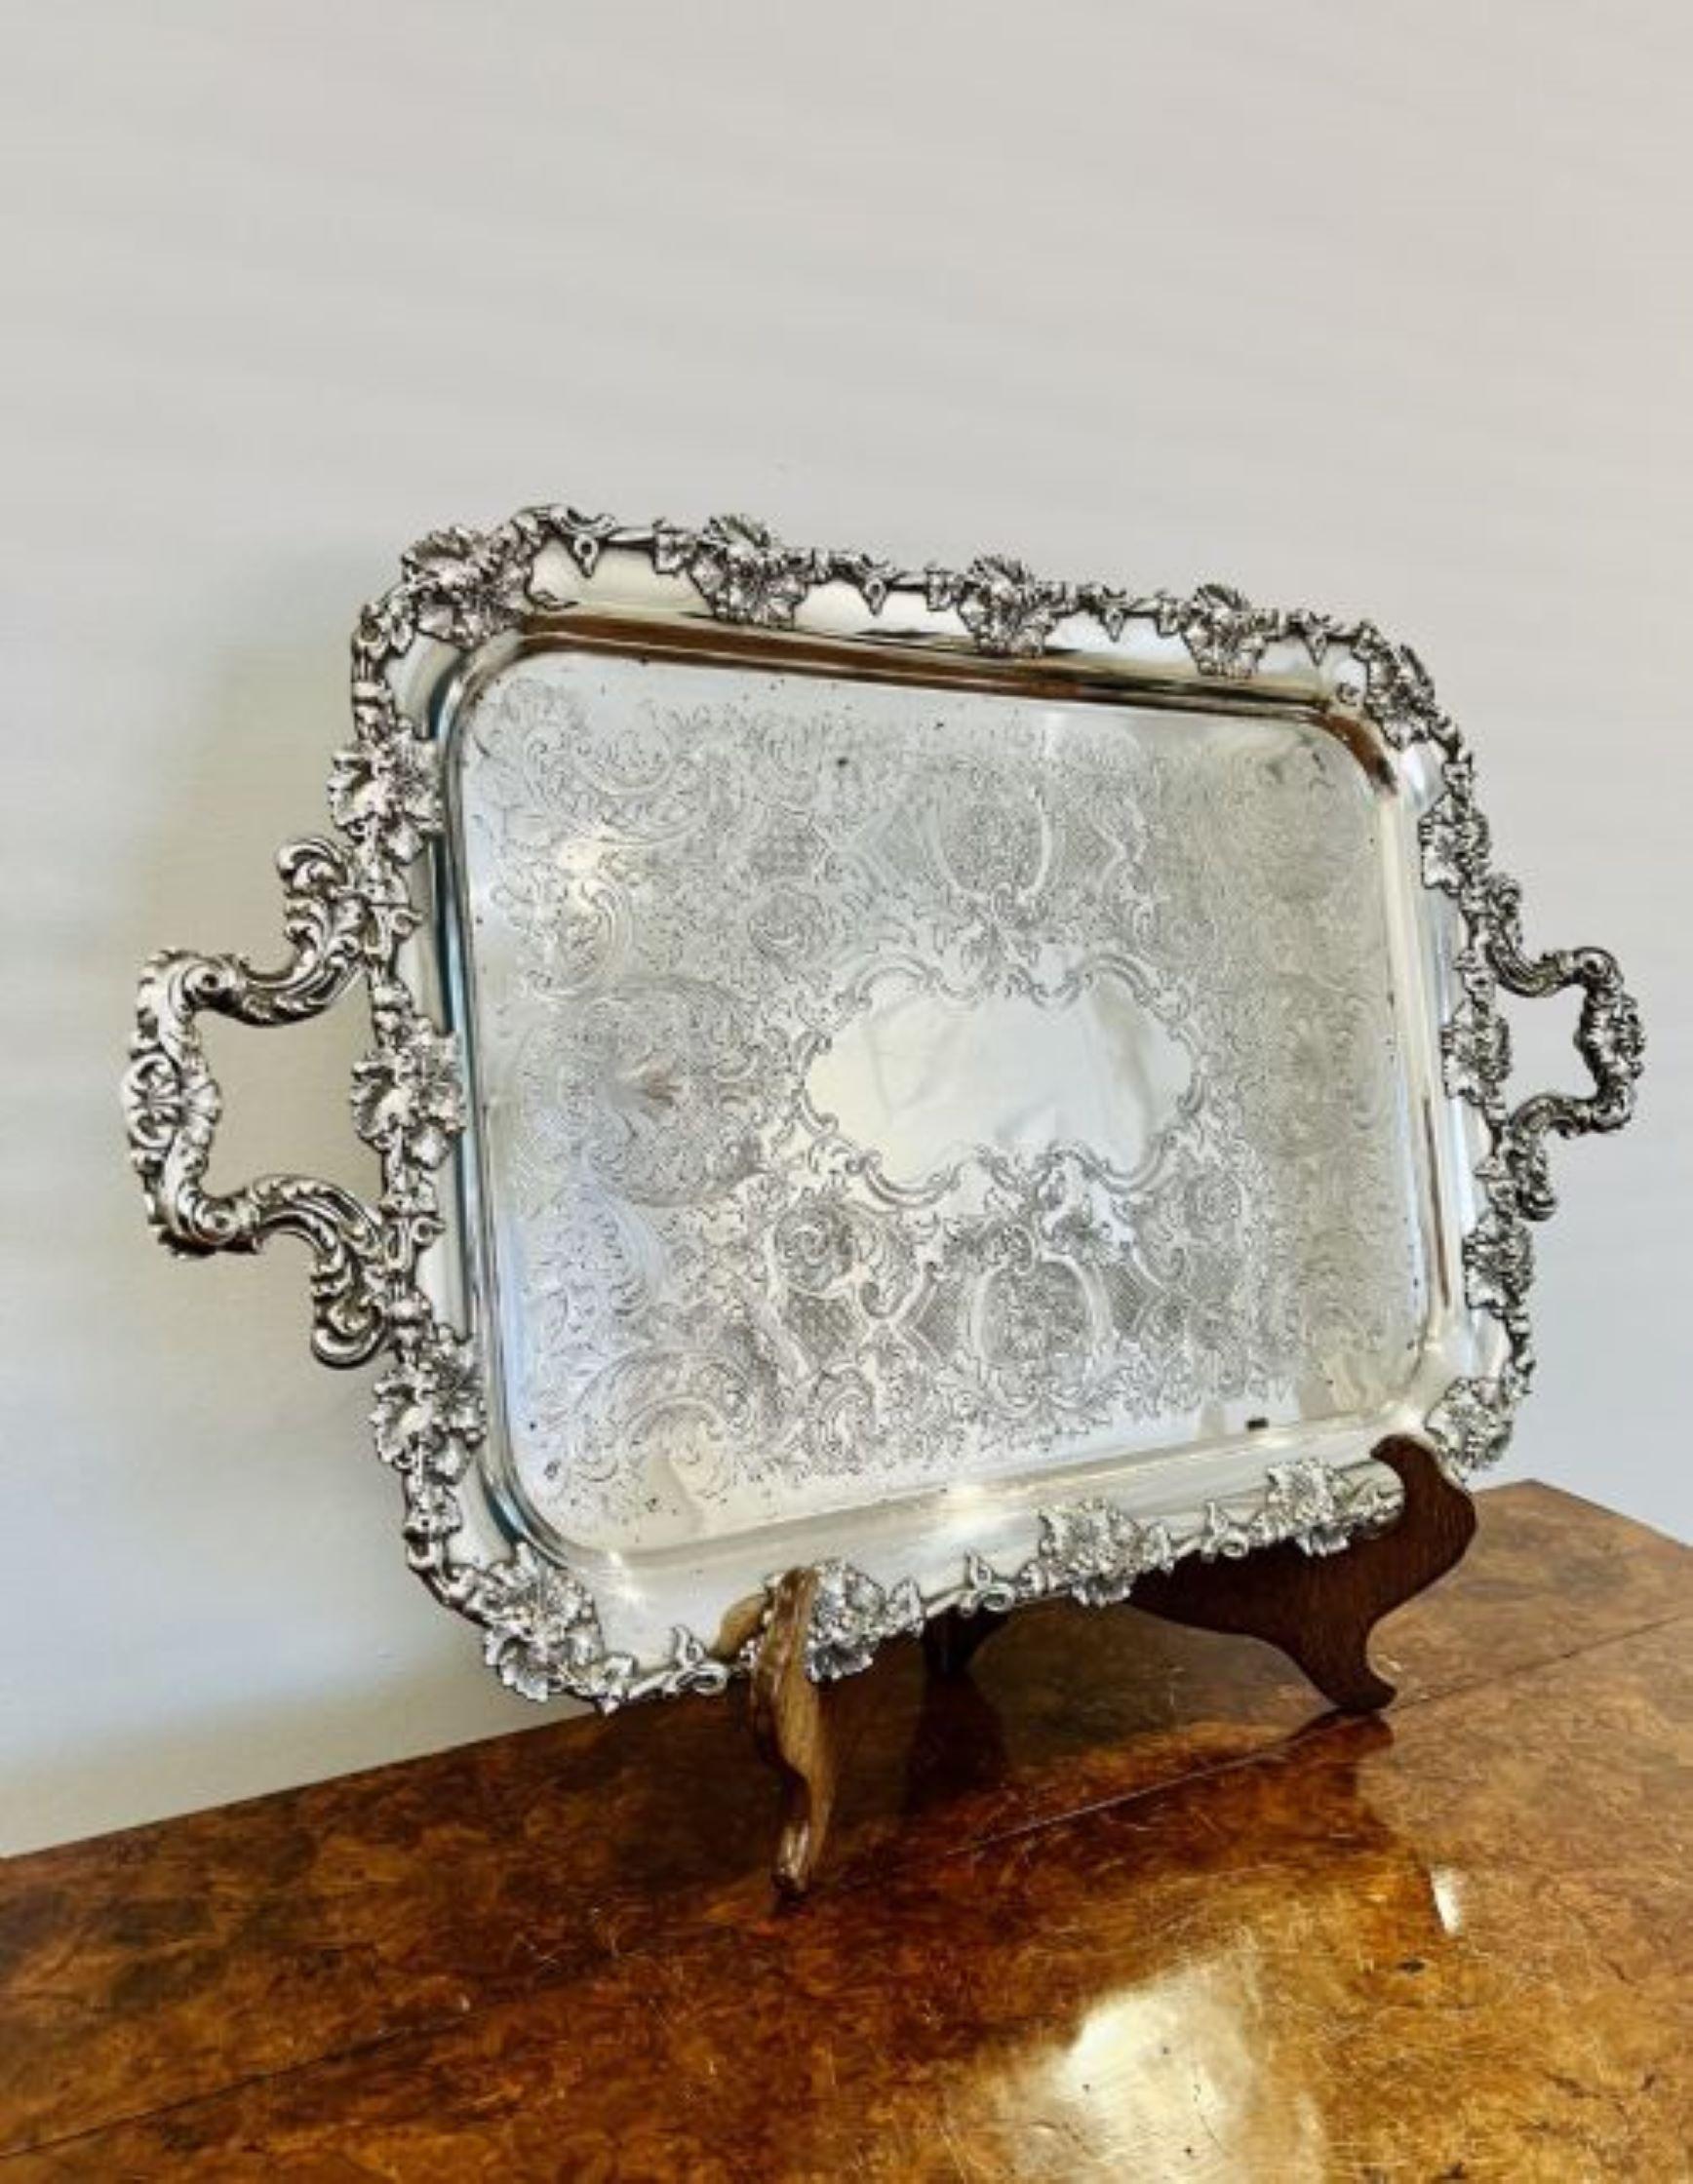 Quality antique Victorian silver plated ornate serving tray For Sale 1